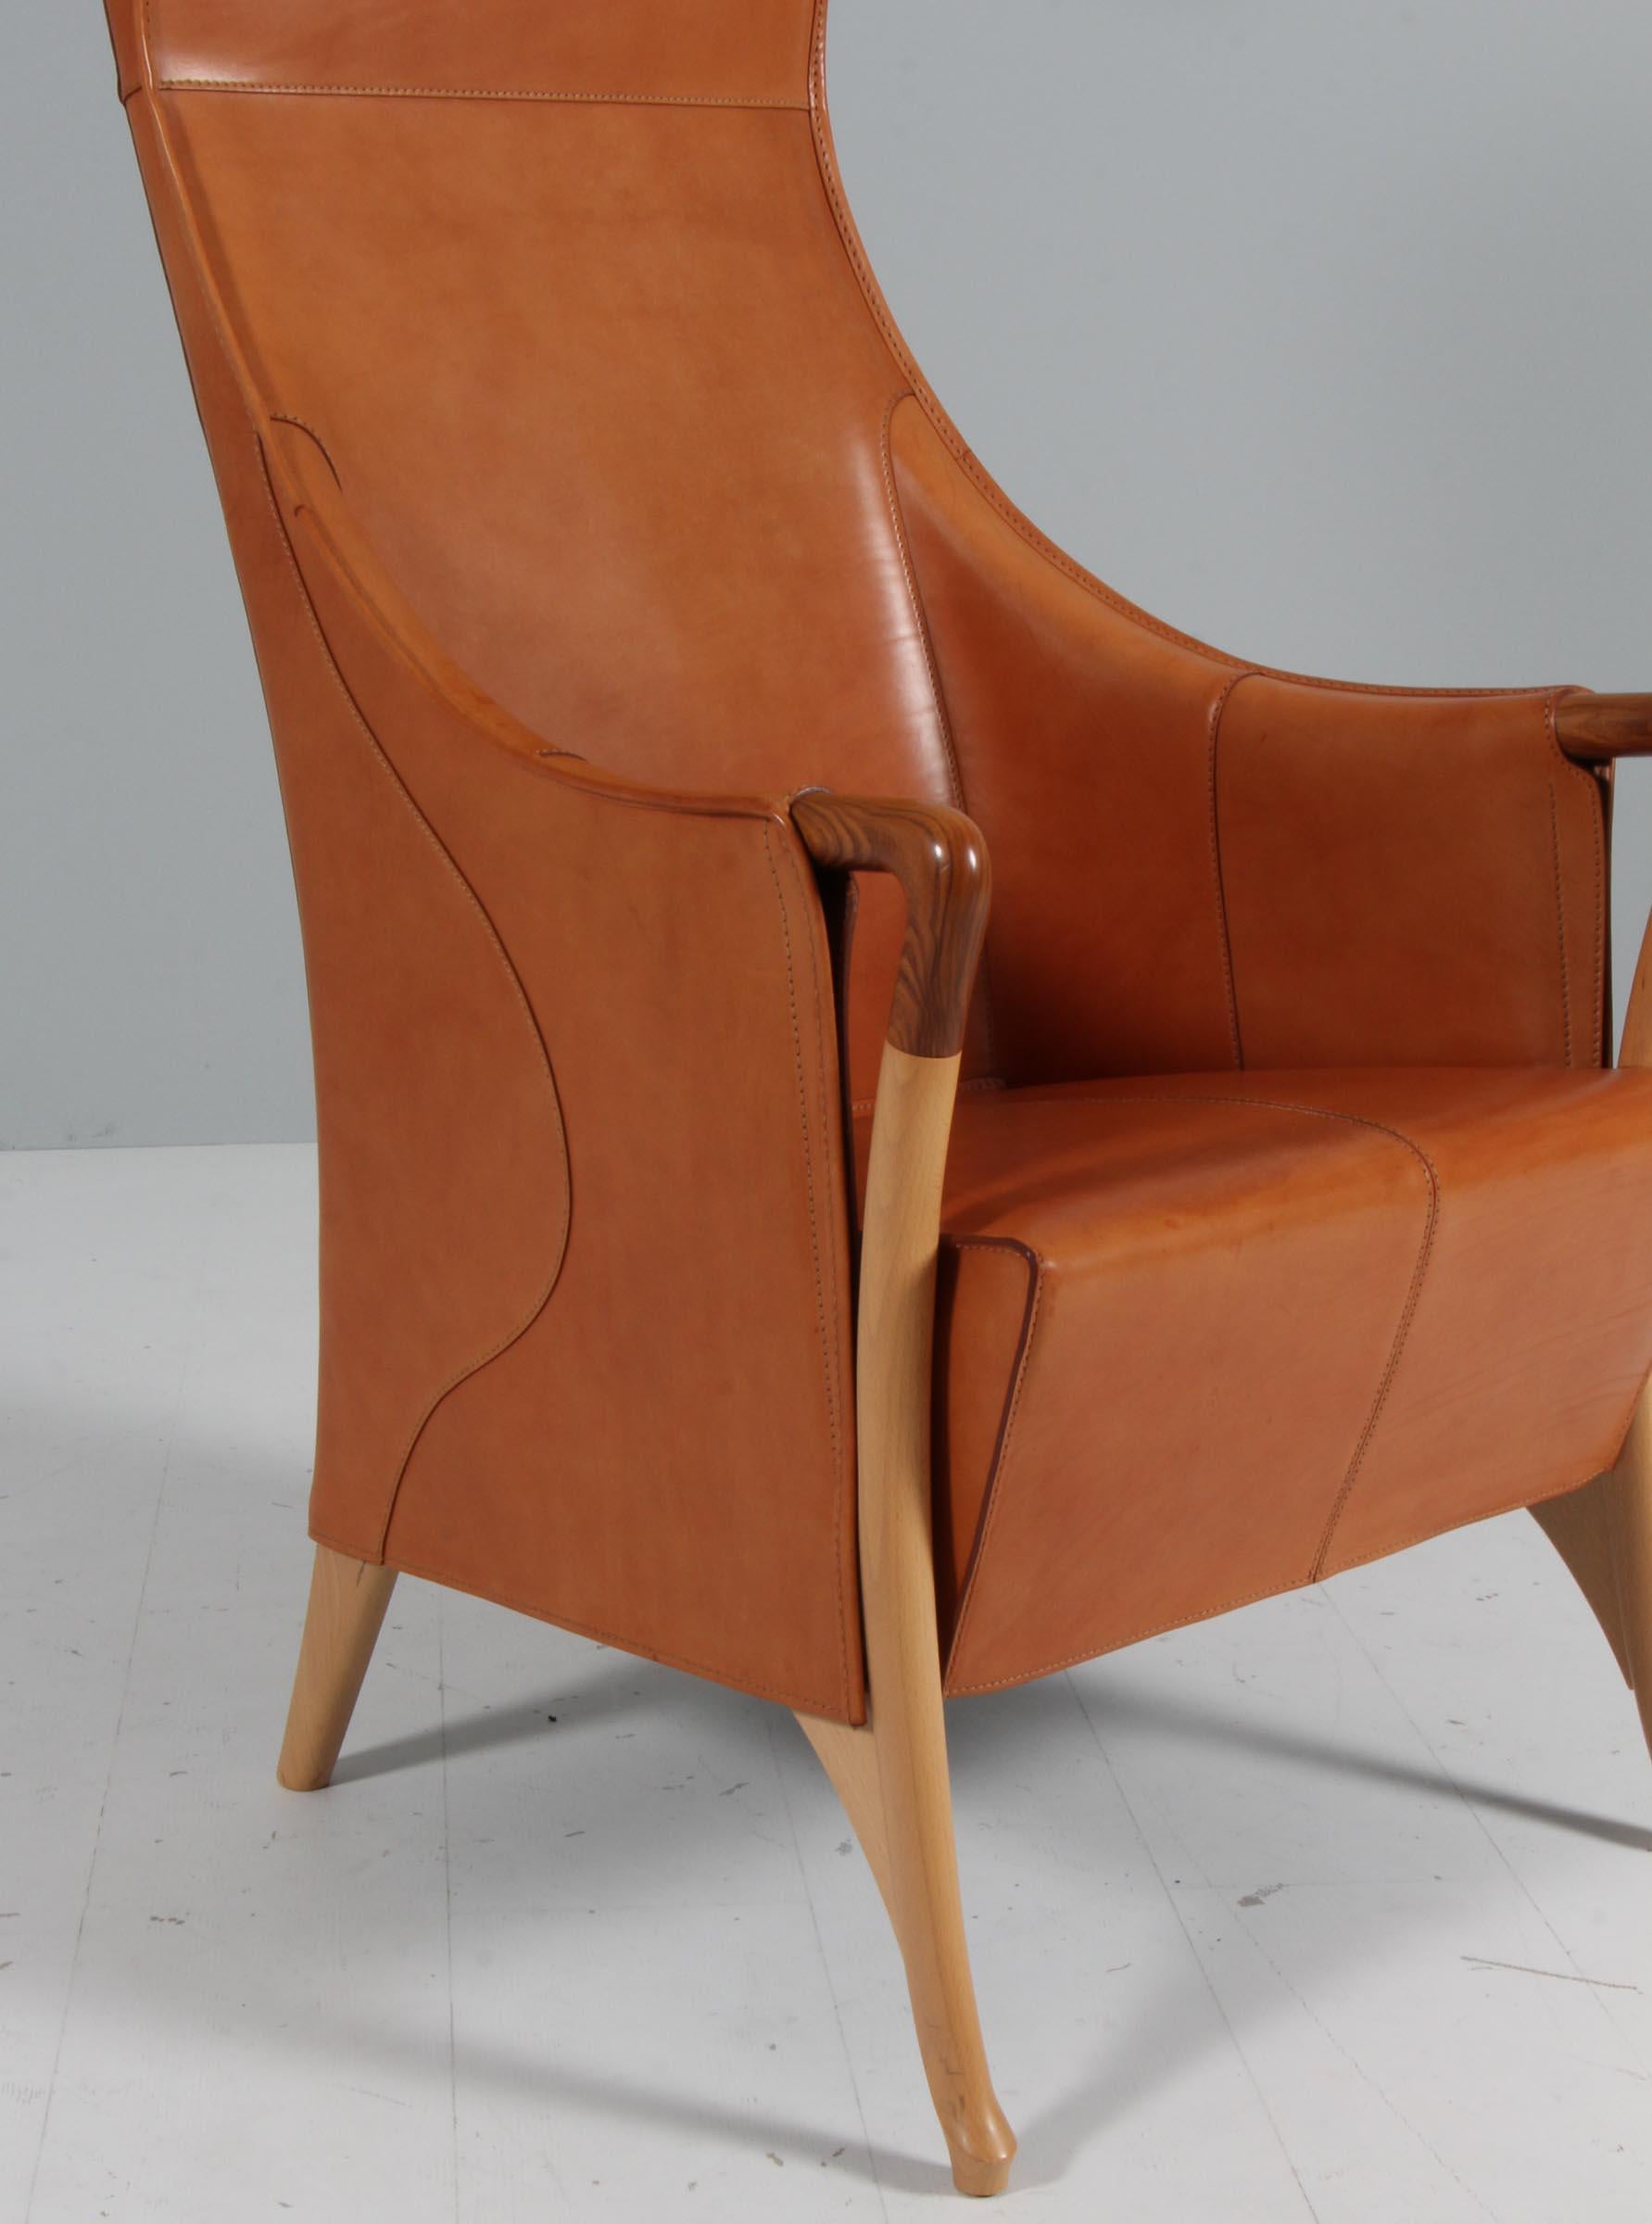 Italian Umberto Asnago for Giorgetti lounge chair in saddle leather For Sale